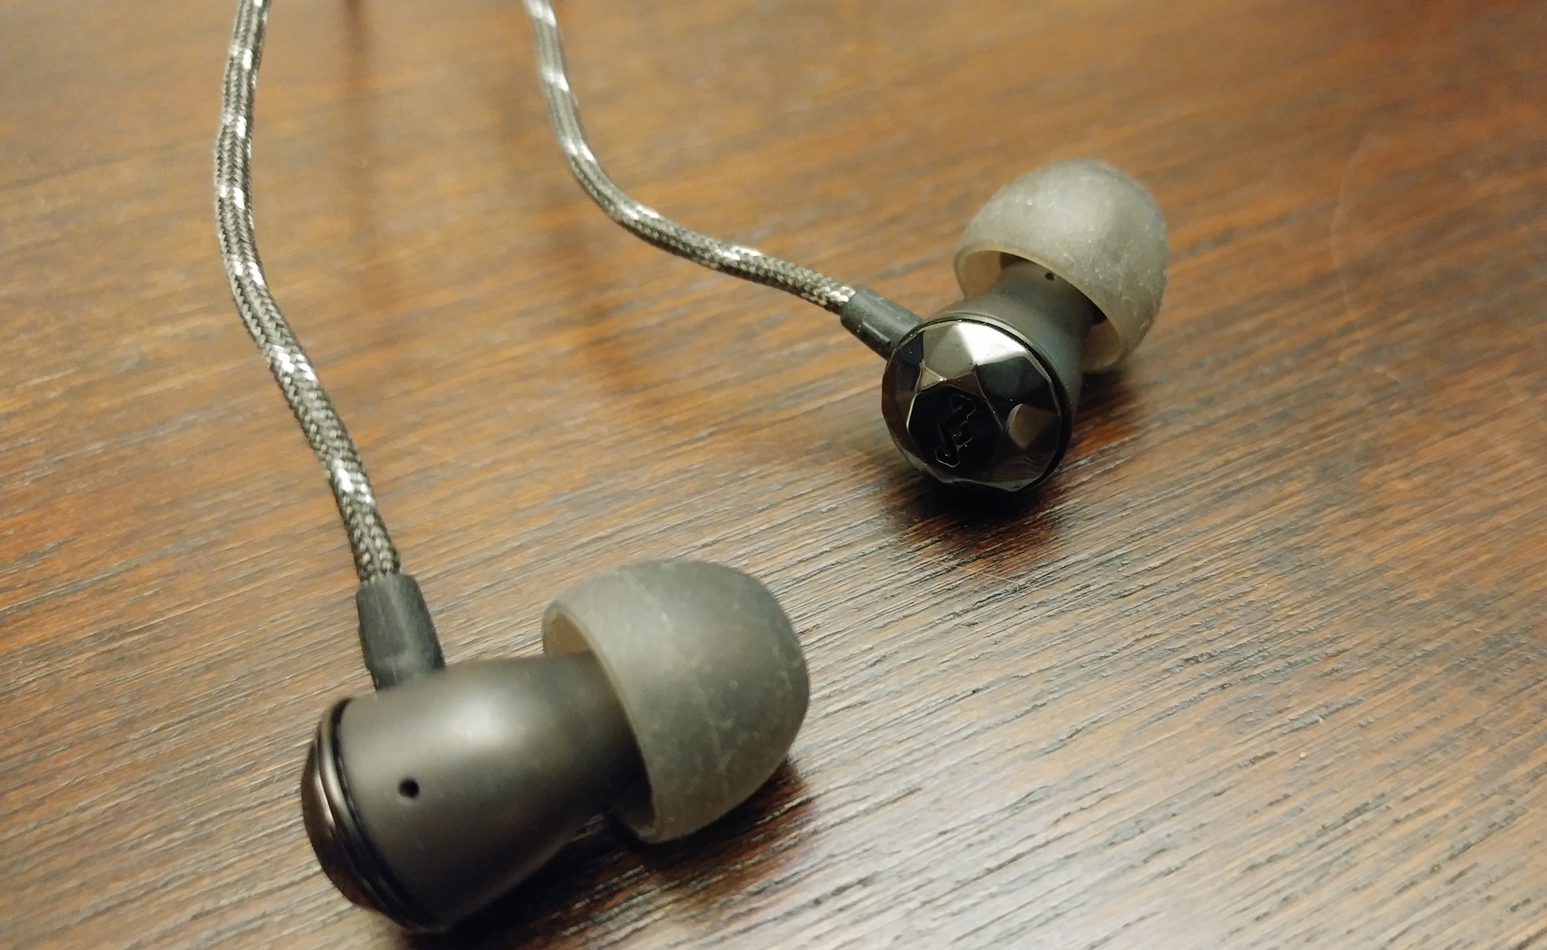 House of Marley Nesta In-Ear Headphones review real